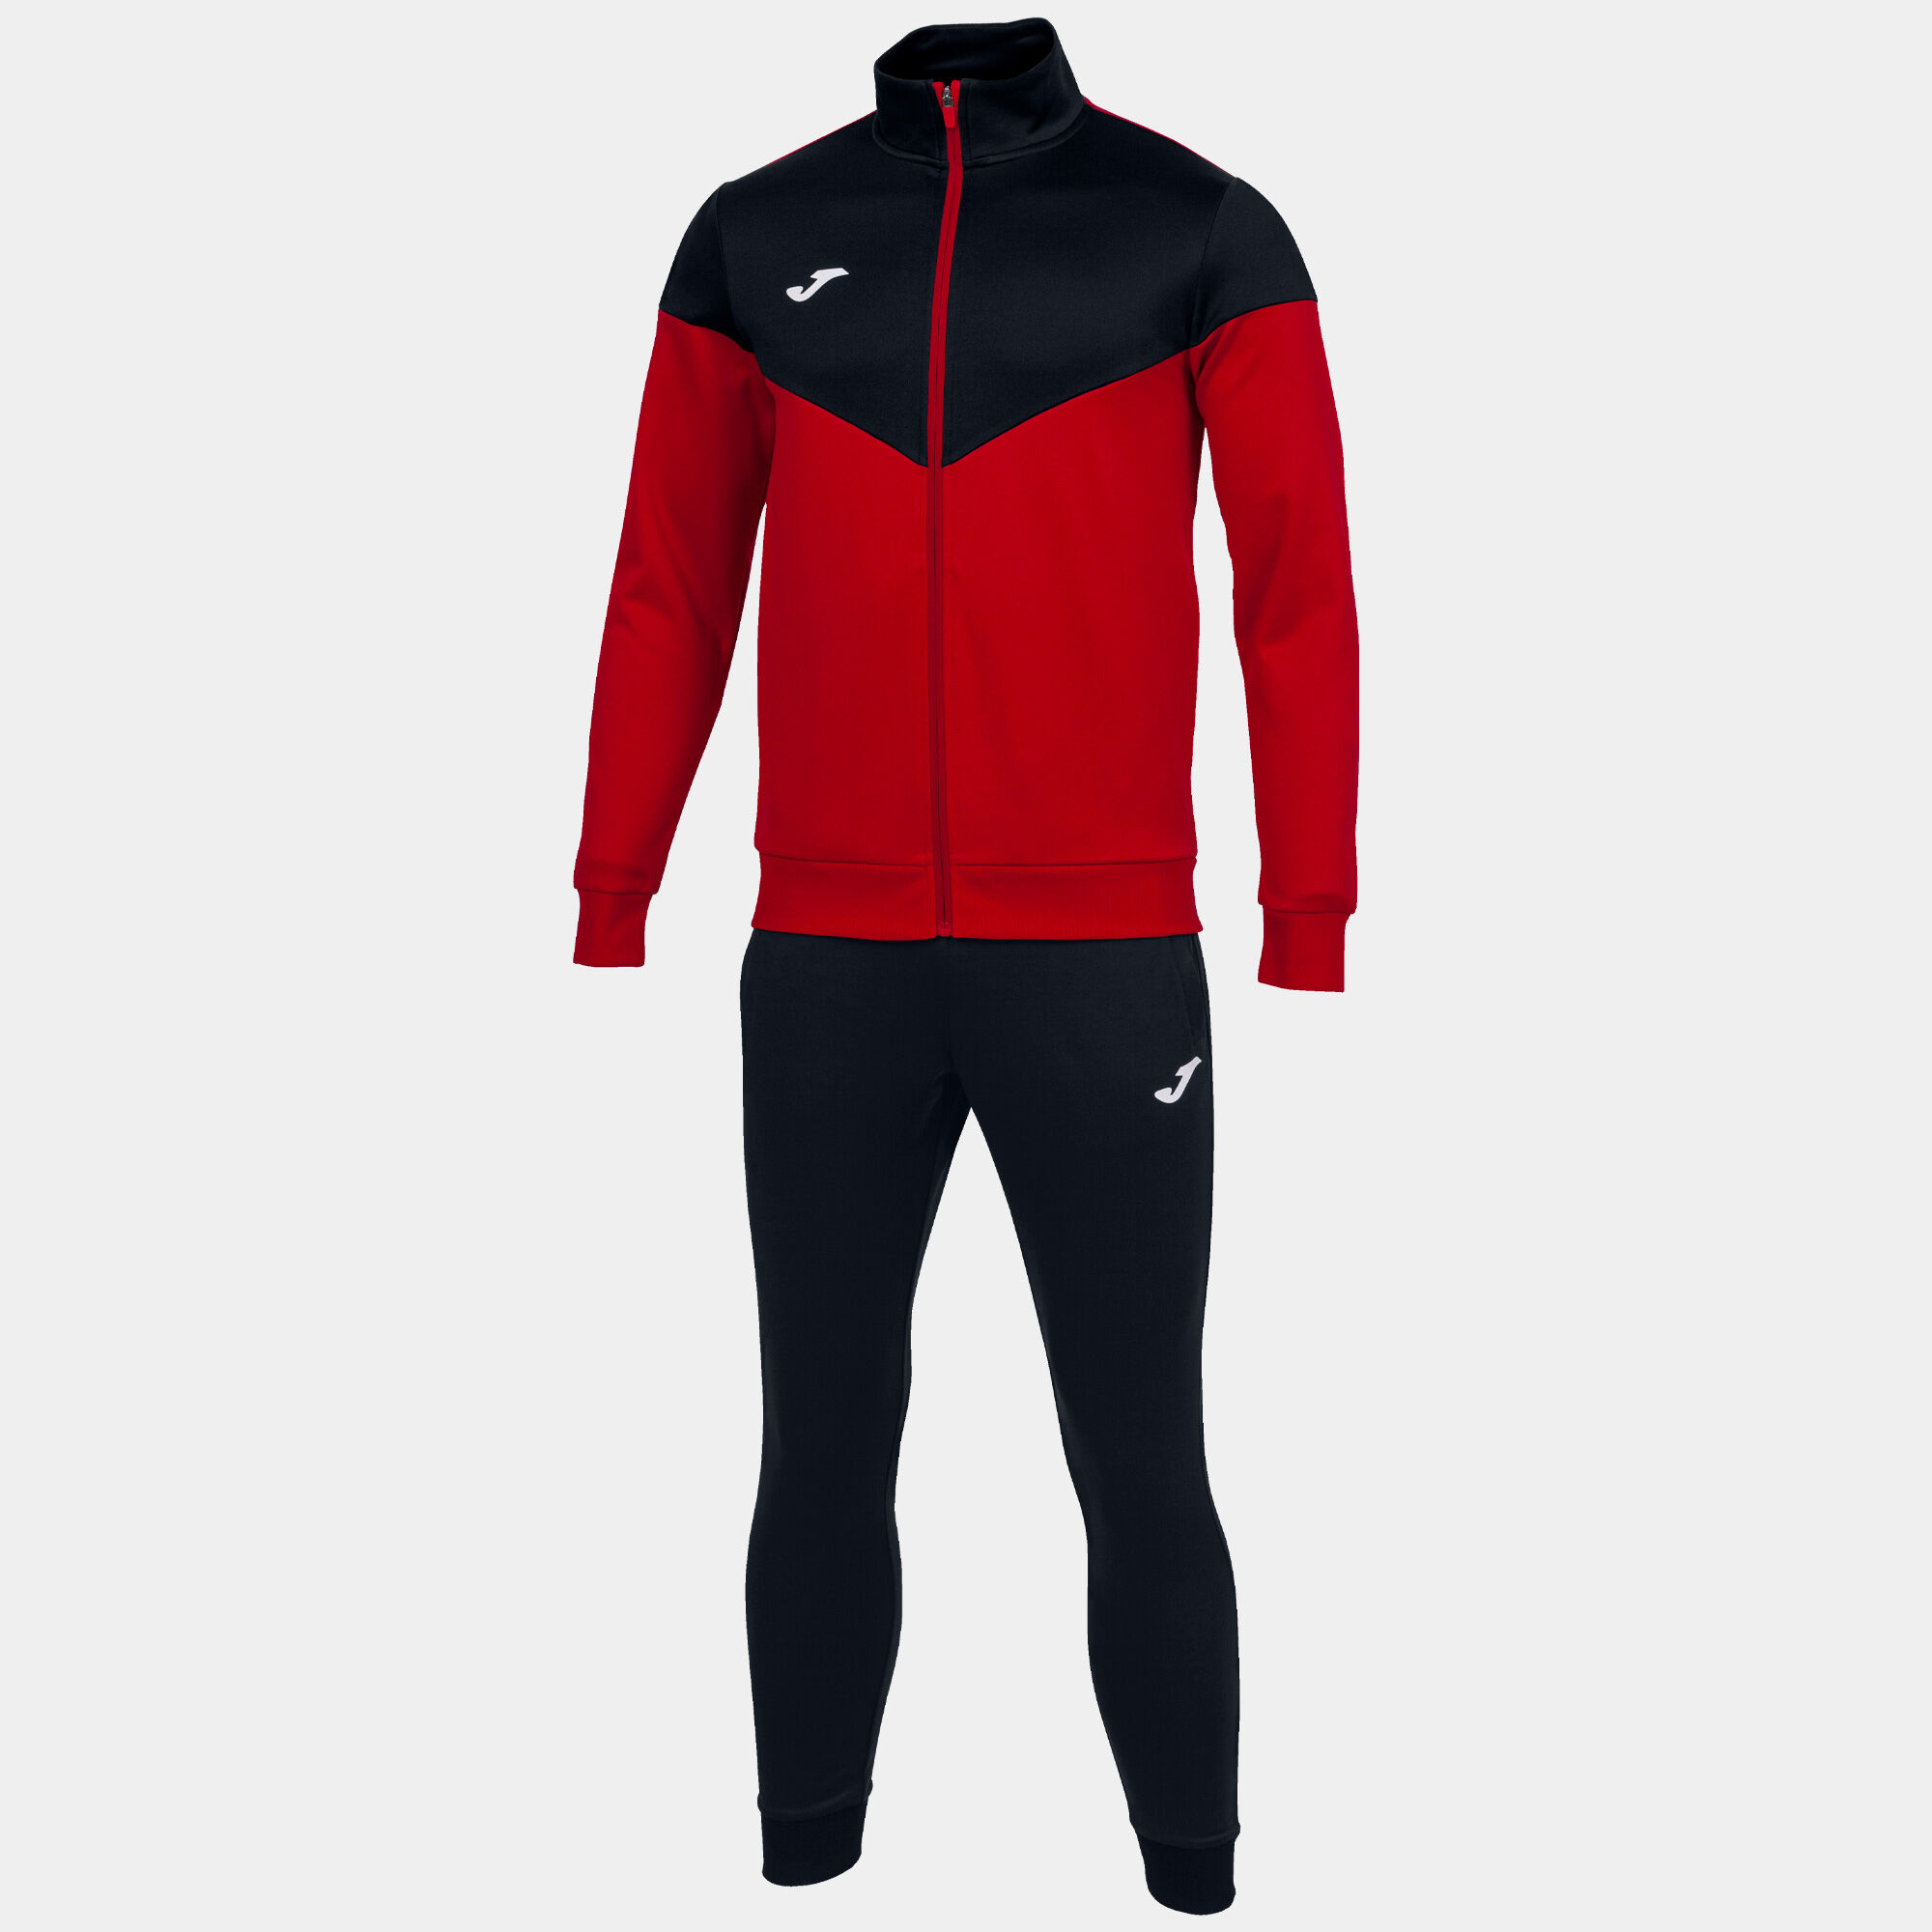 Tracksuit man Oxford red black